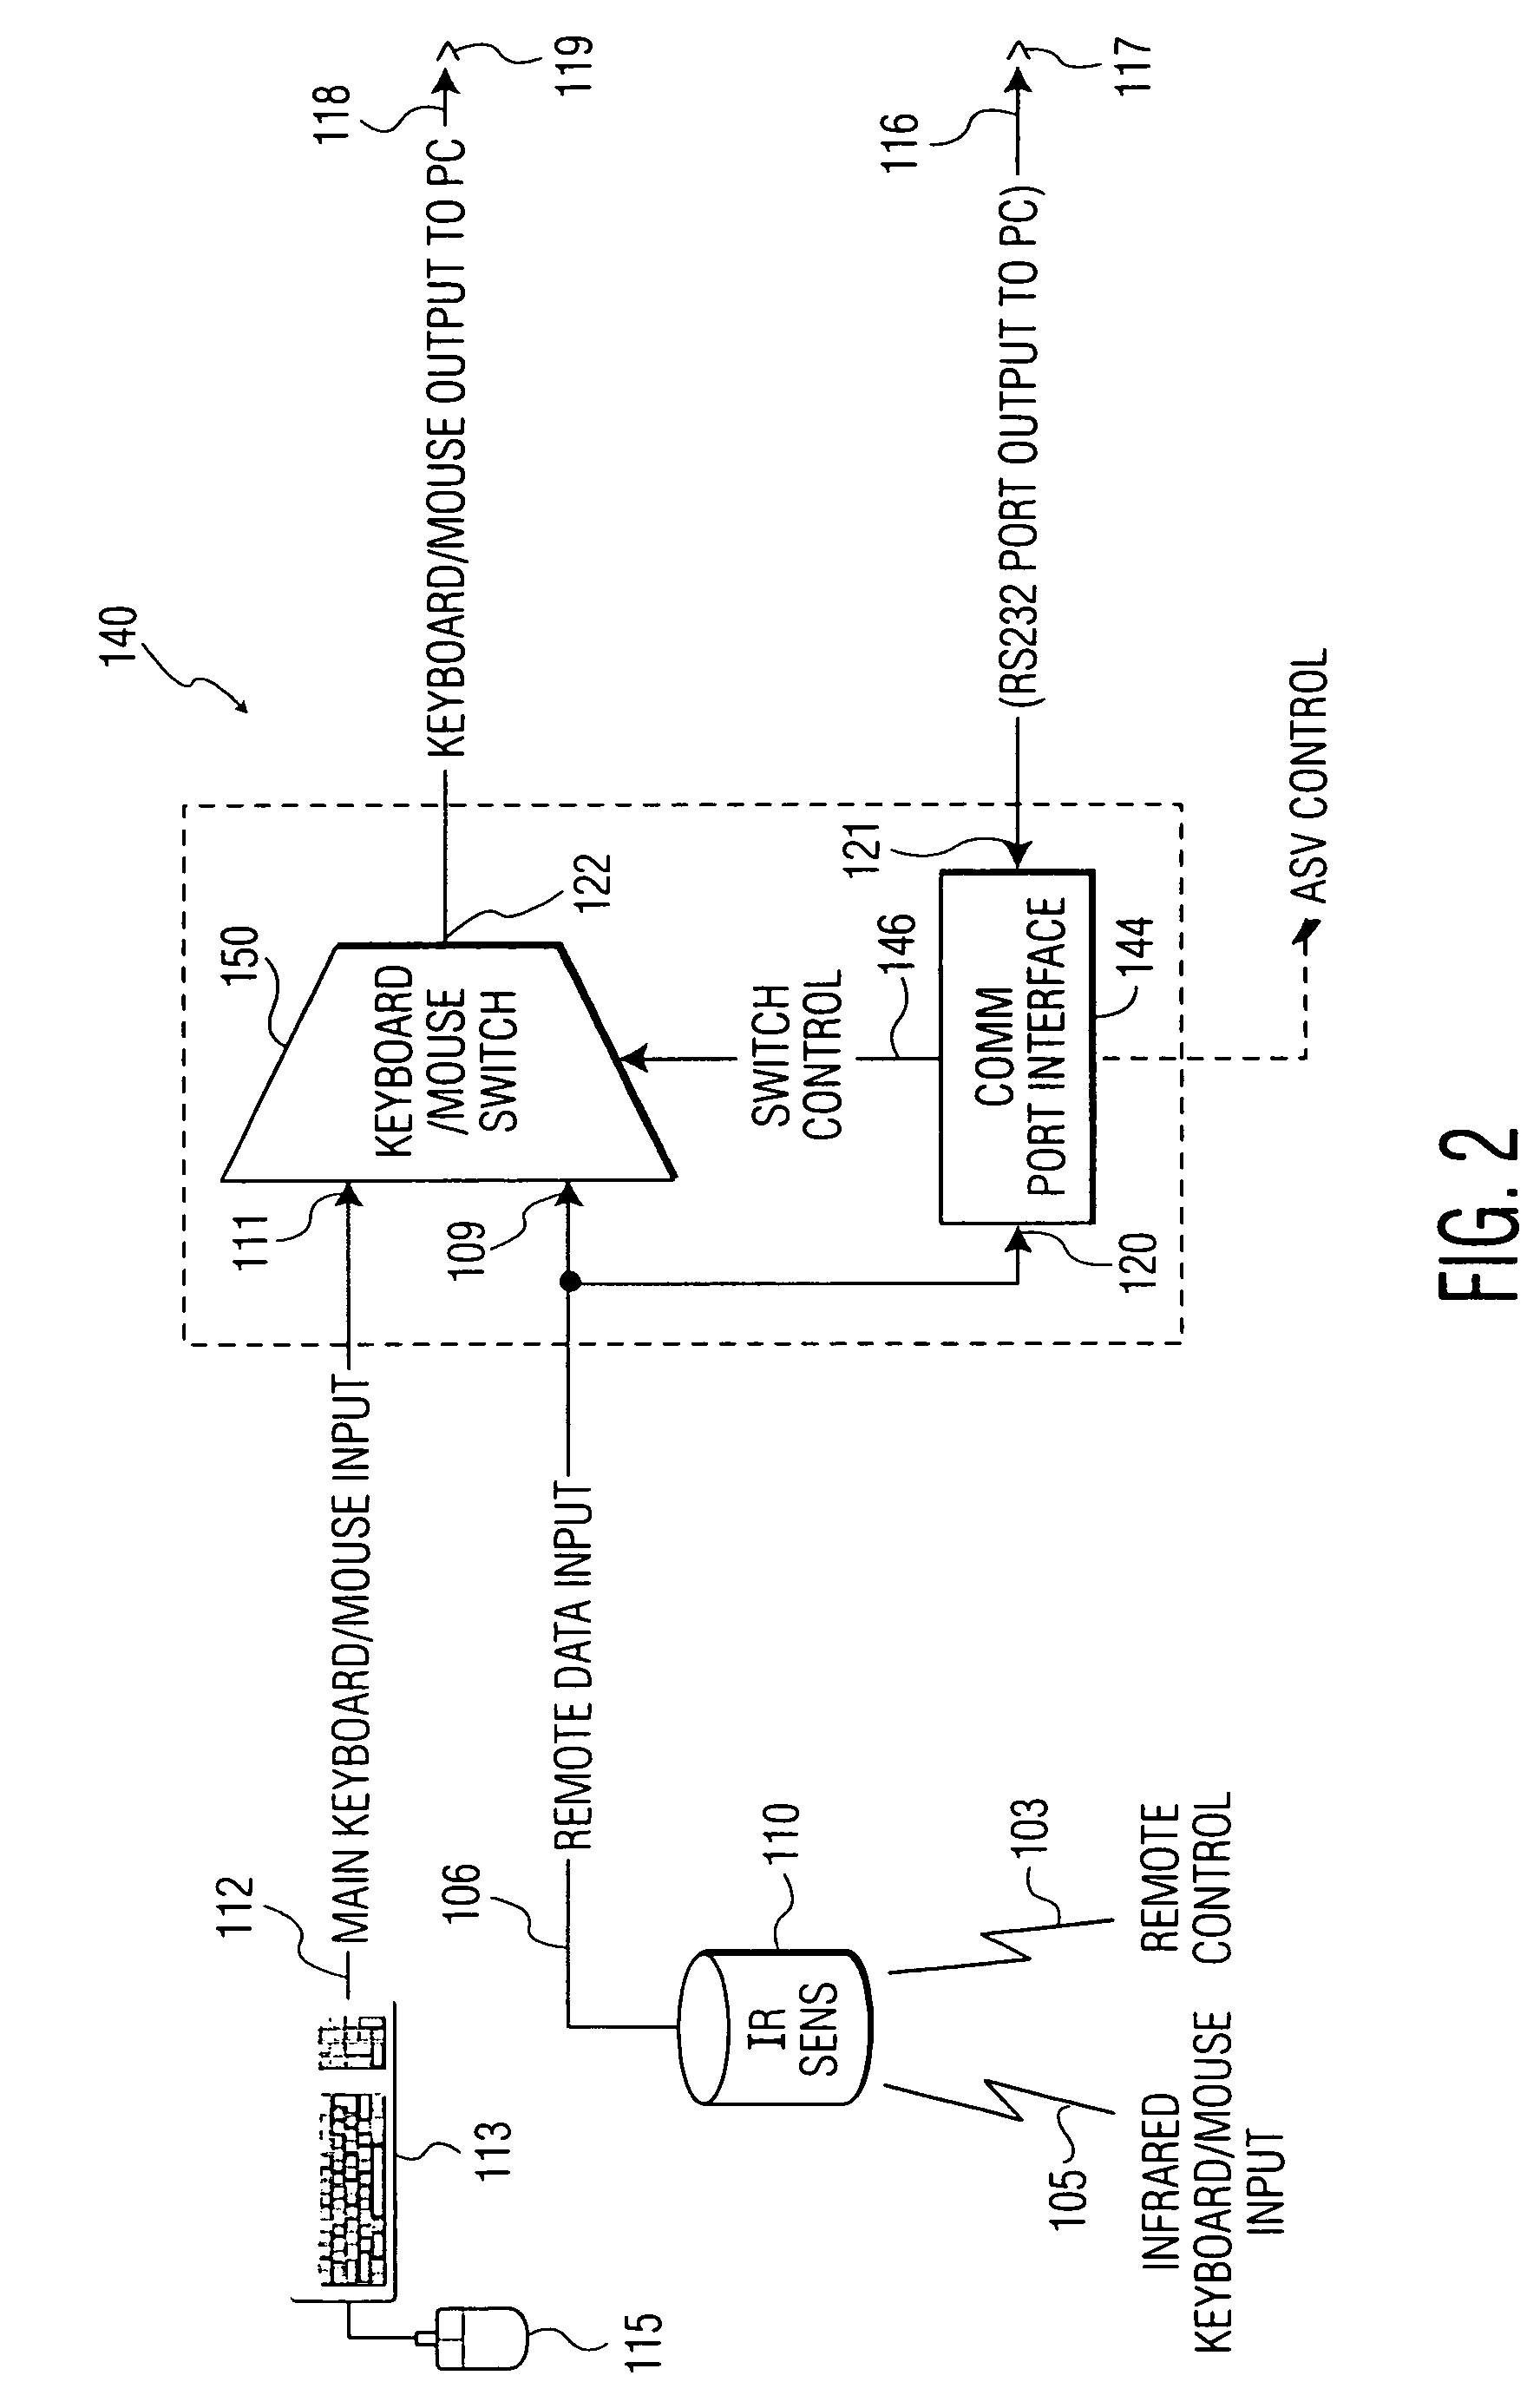 Method and apparatus for remote use of personal computer